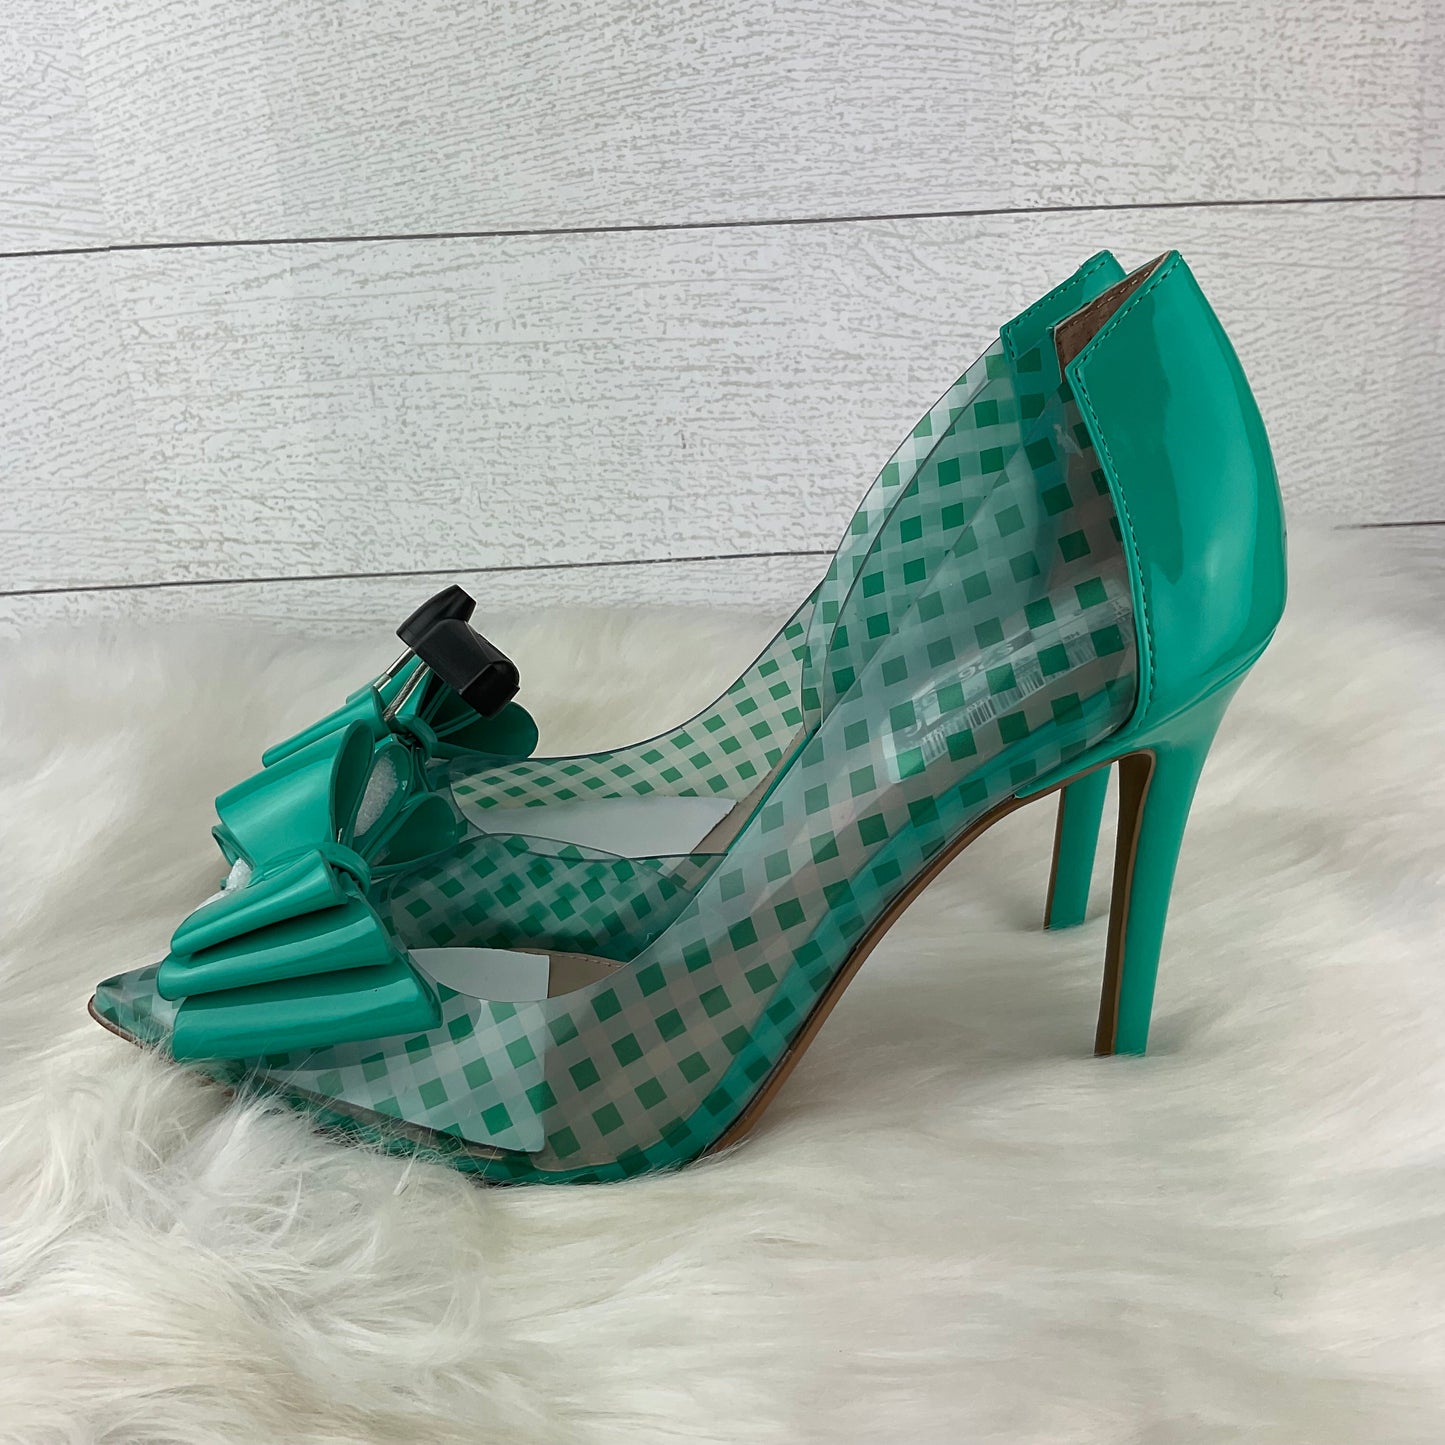 Teal Shoes Heels Stiletto Betsey Johnson, Size 10